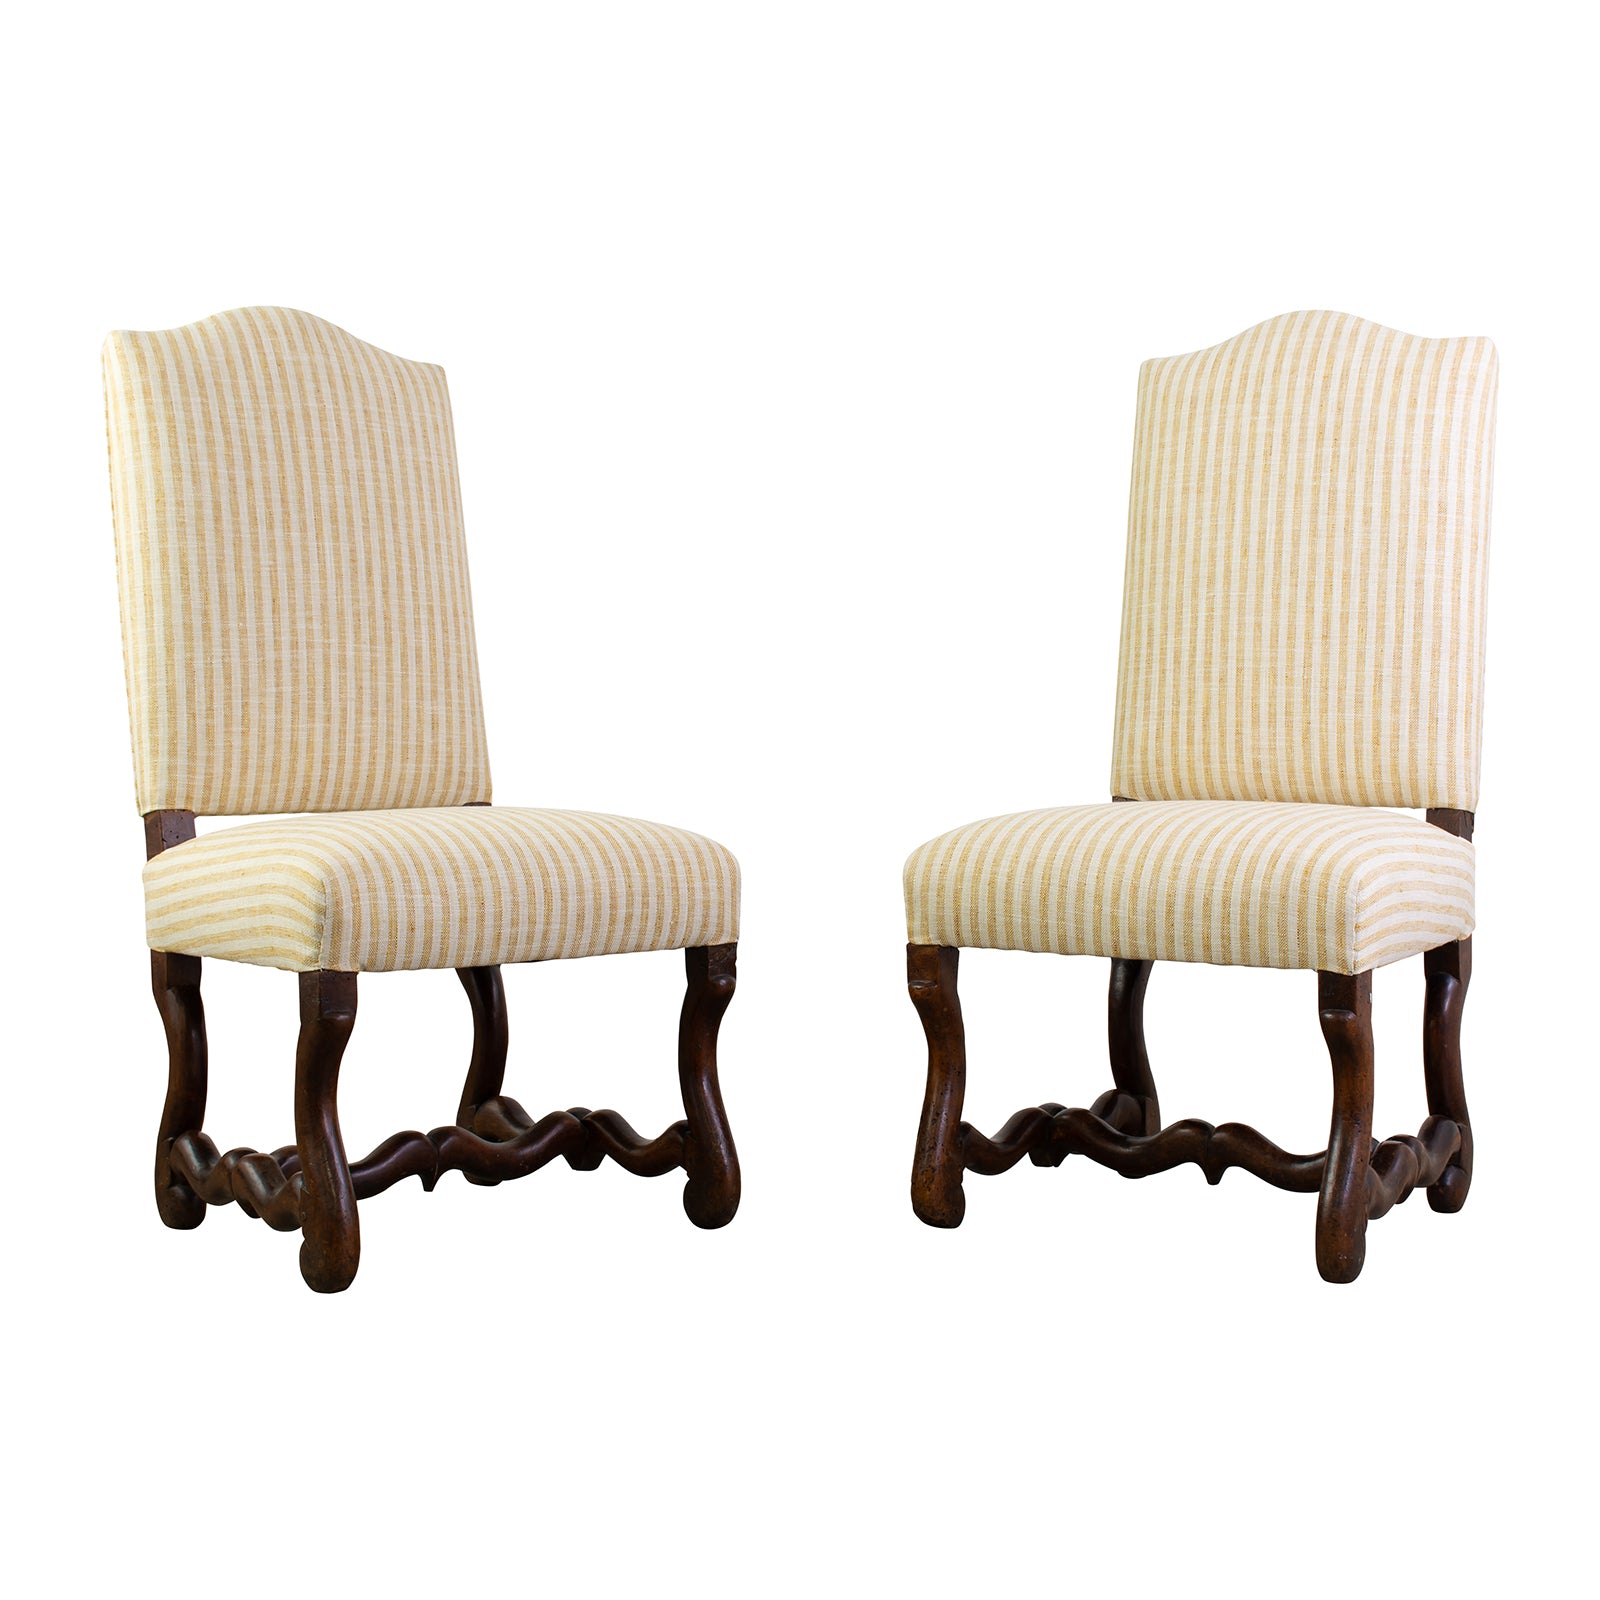 A late 17th century French Os de Mouton Side Chairs